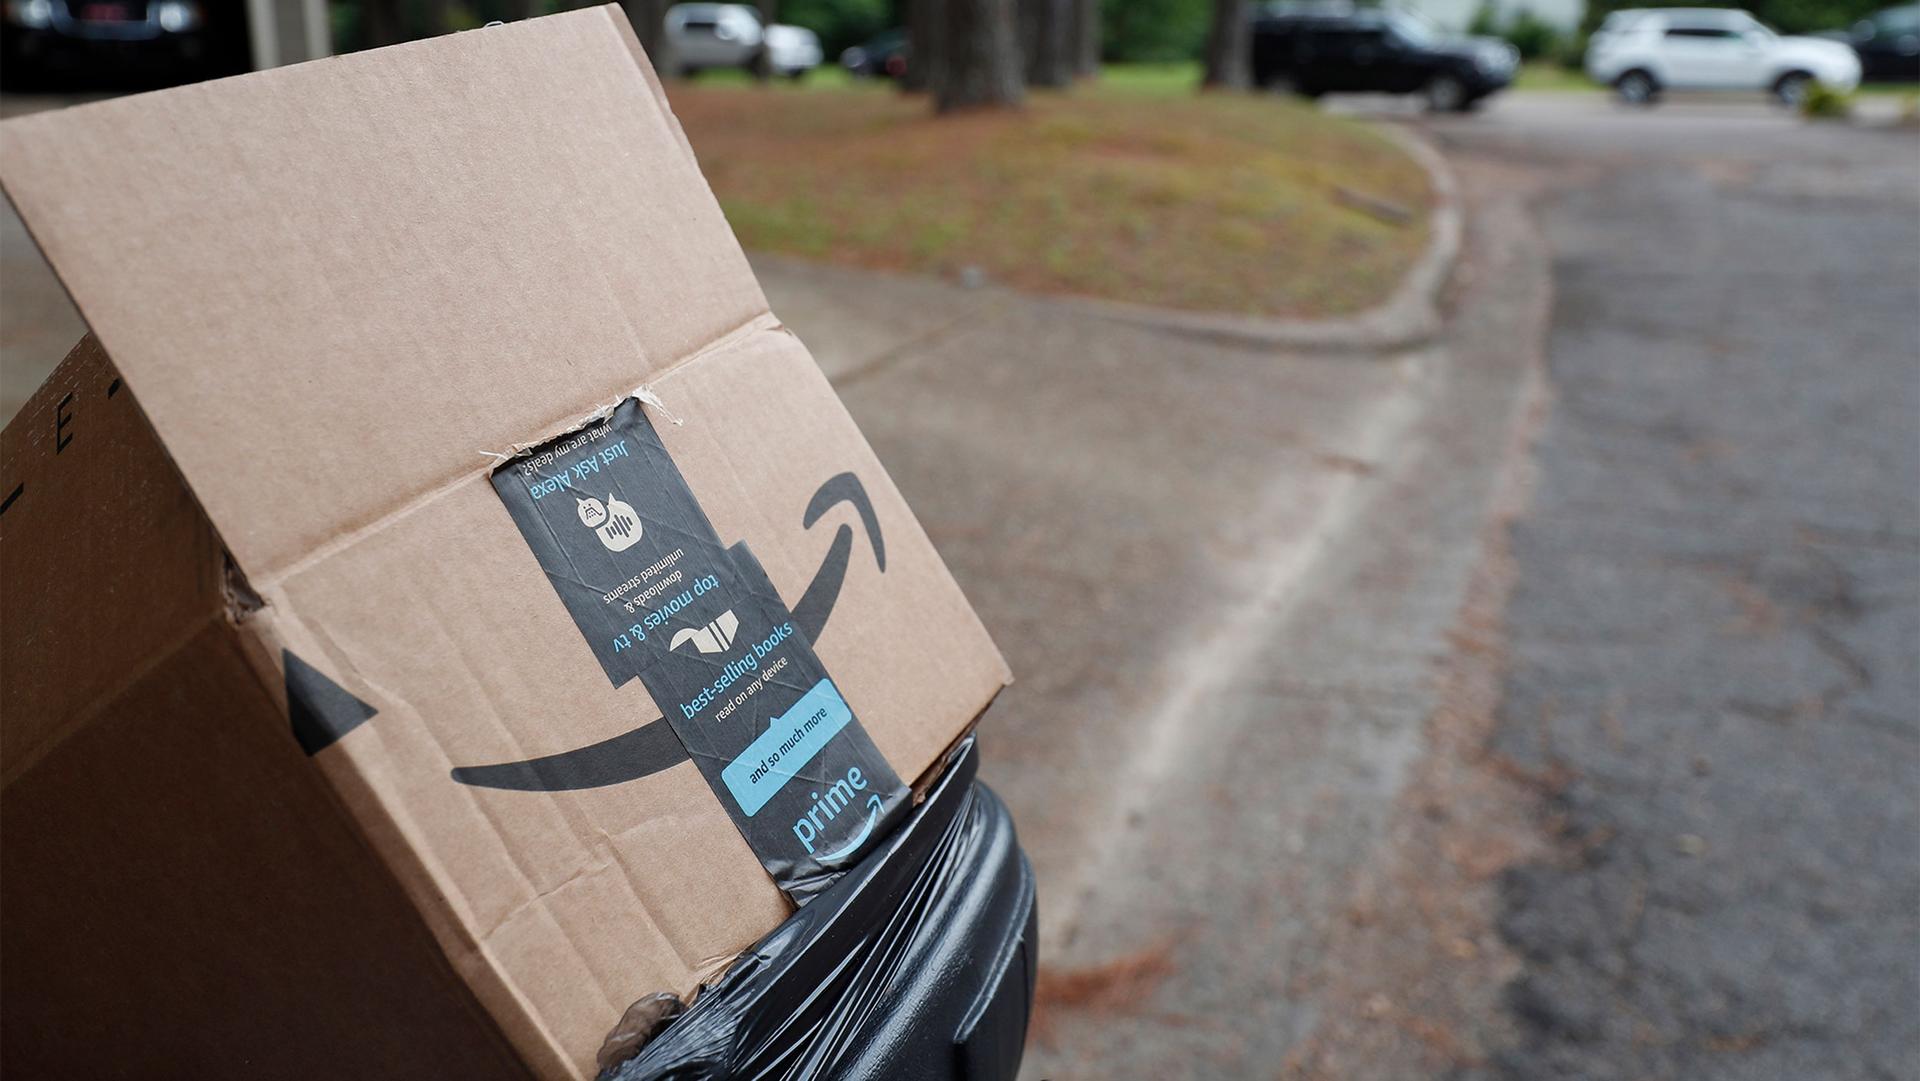 An empty Amazon box sits outside a north Jackson, Miss., residence, awaiting pickup for recycling